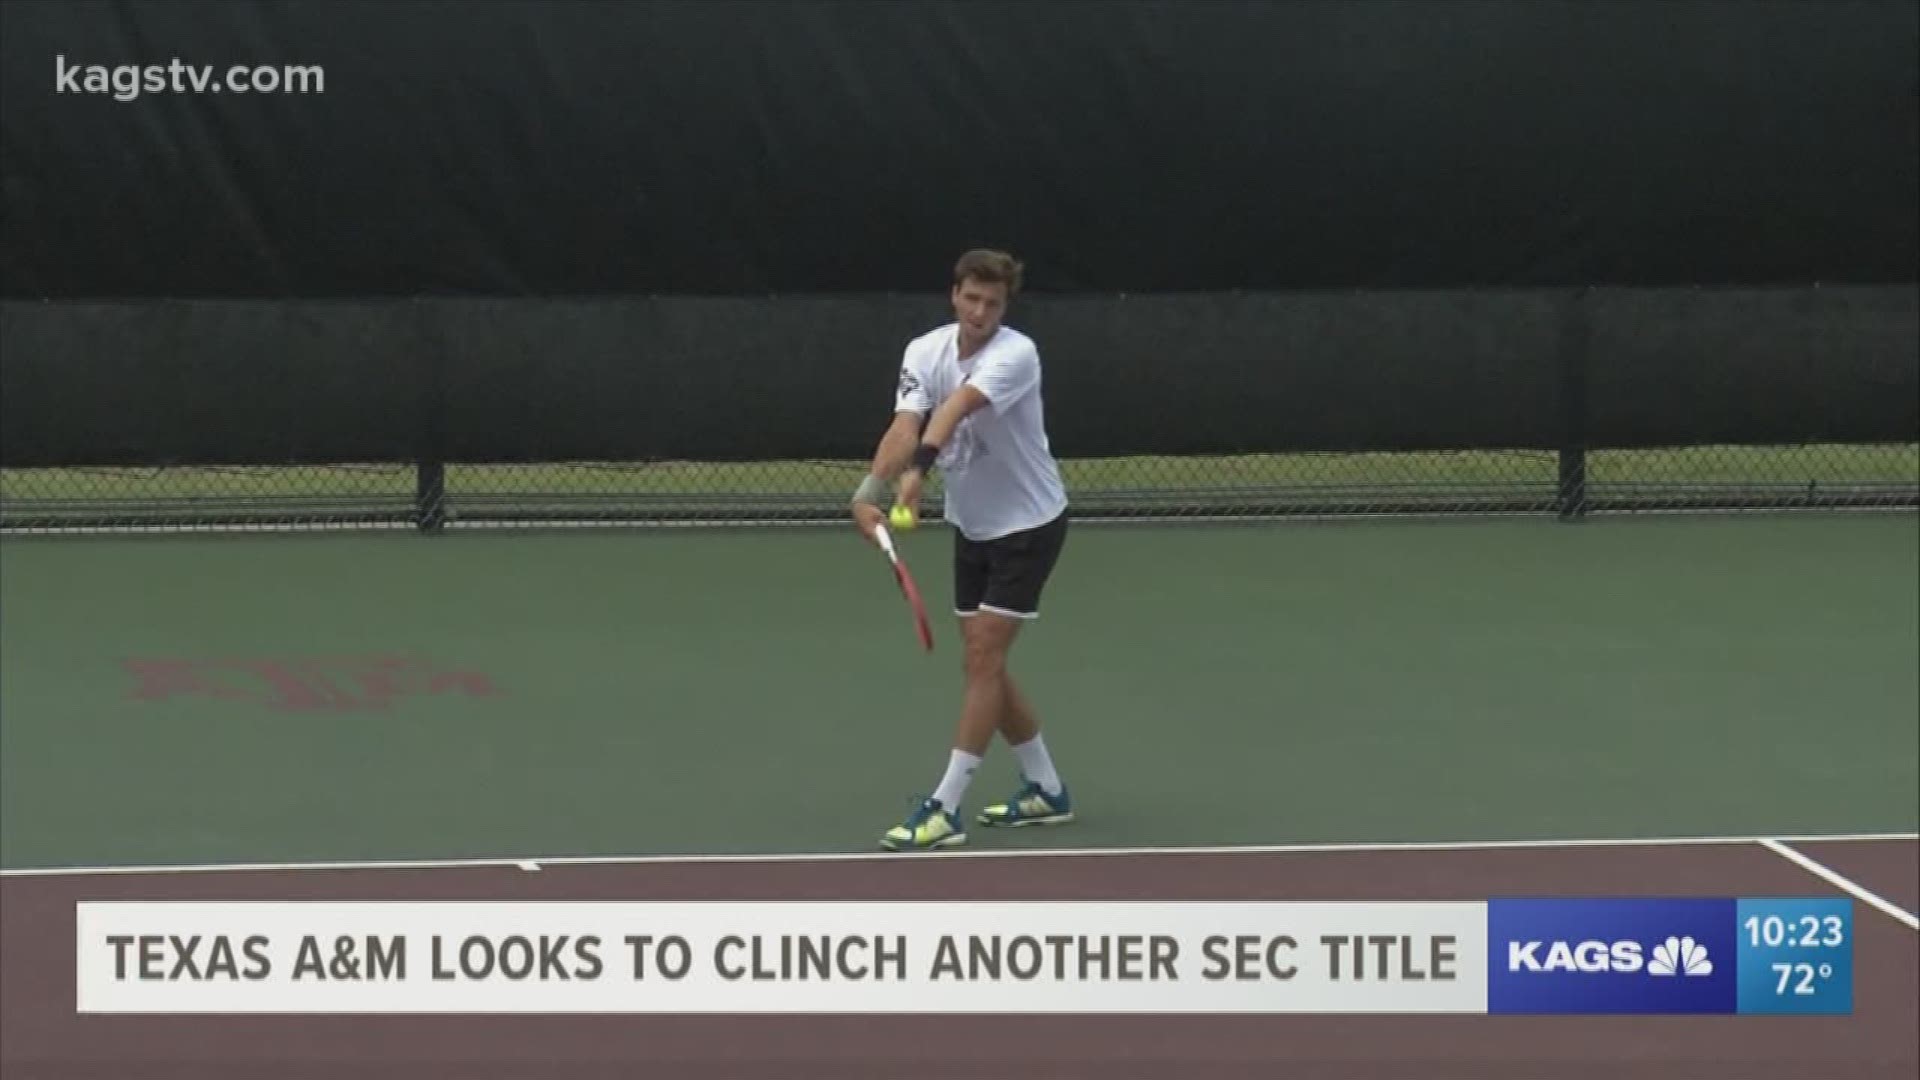 No. 5 Texas A&M men's tennis can clinch a second straight SEC championship on Friday with a win over No. 7 Mississippi State.